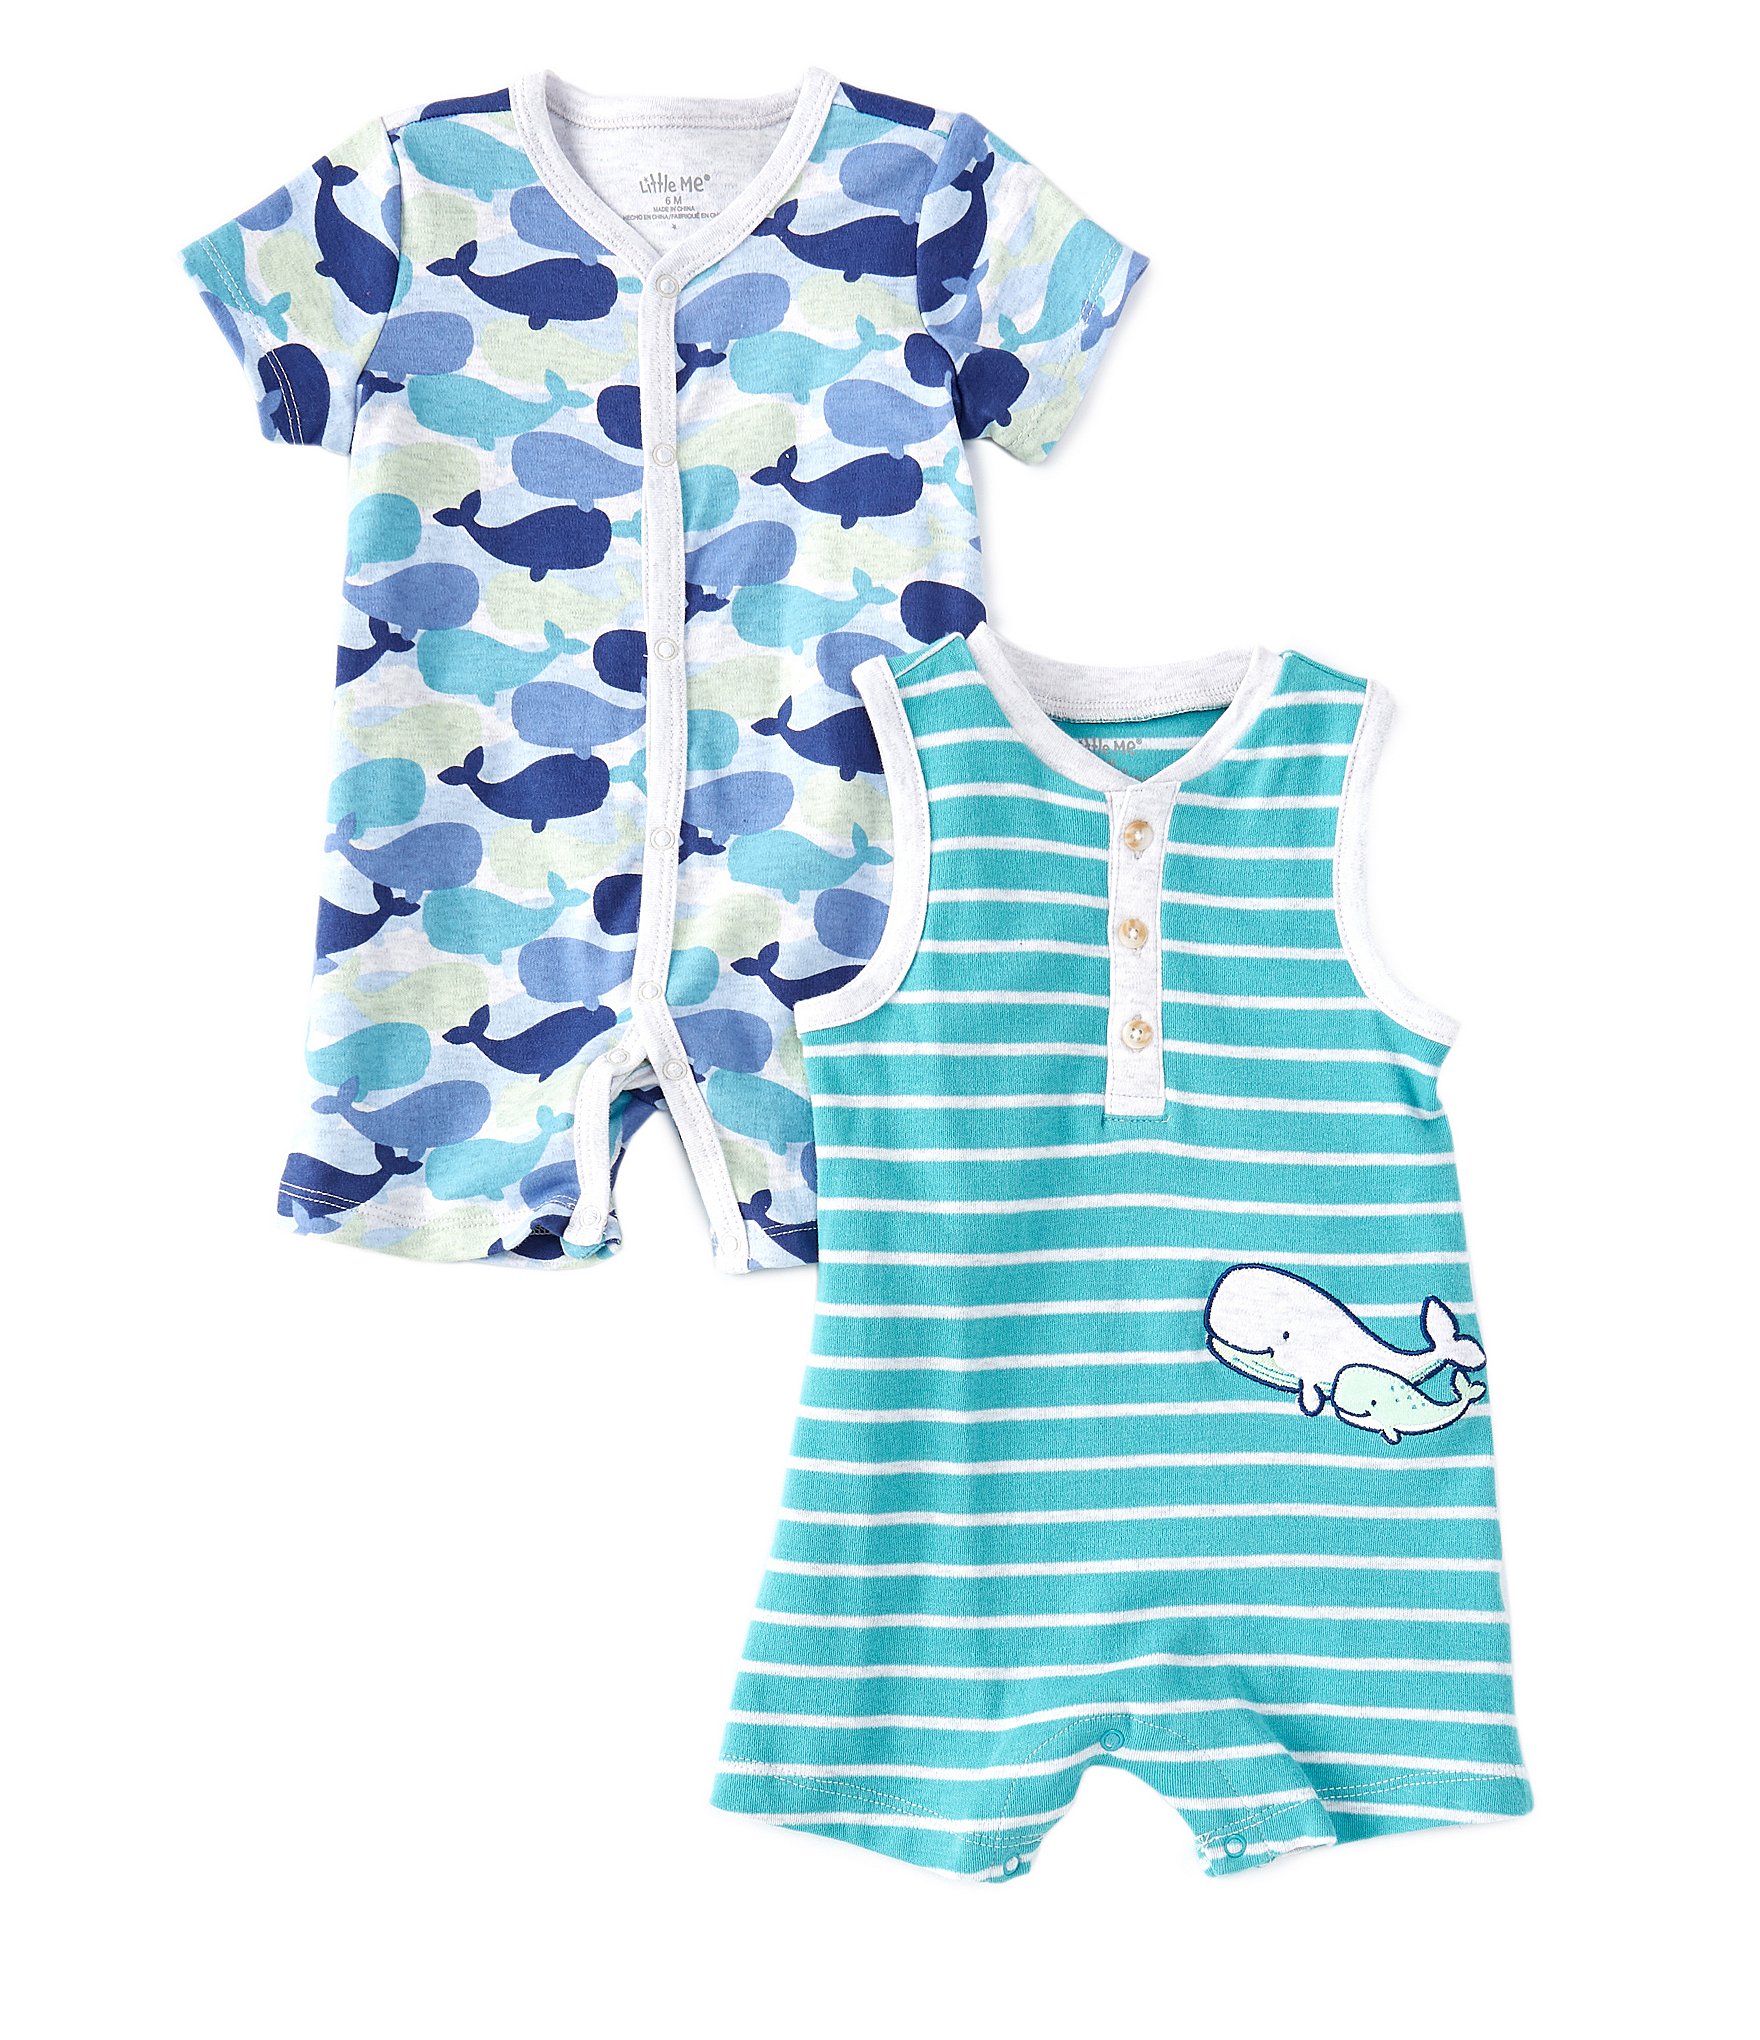 Little Me Baby Boys 3-12 Months Short Sleeve/Sleeveless Striped Whale ...